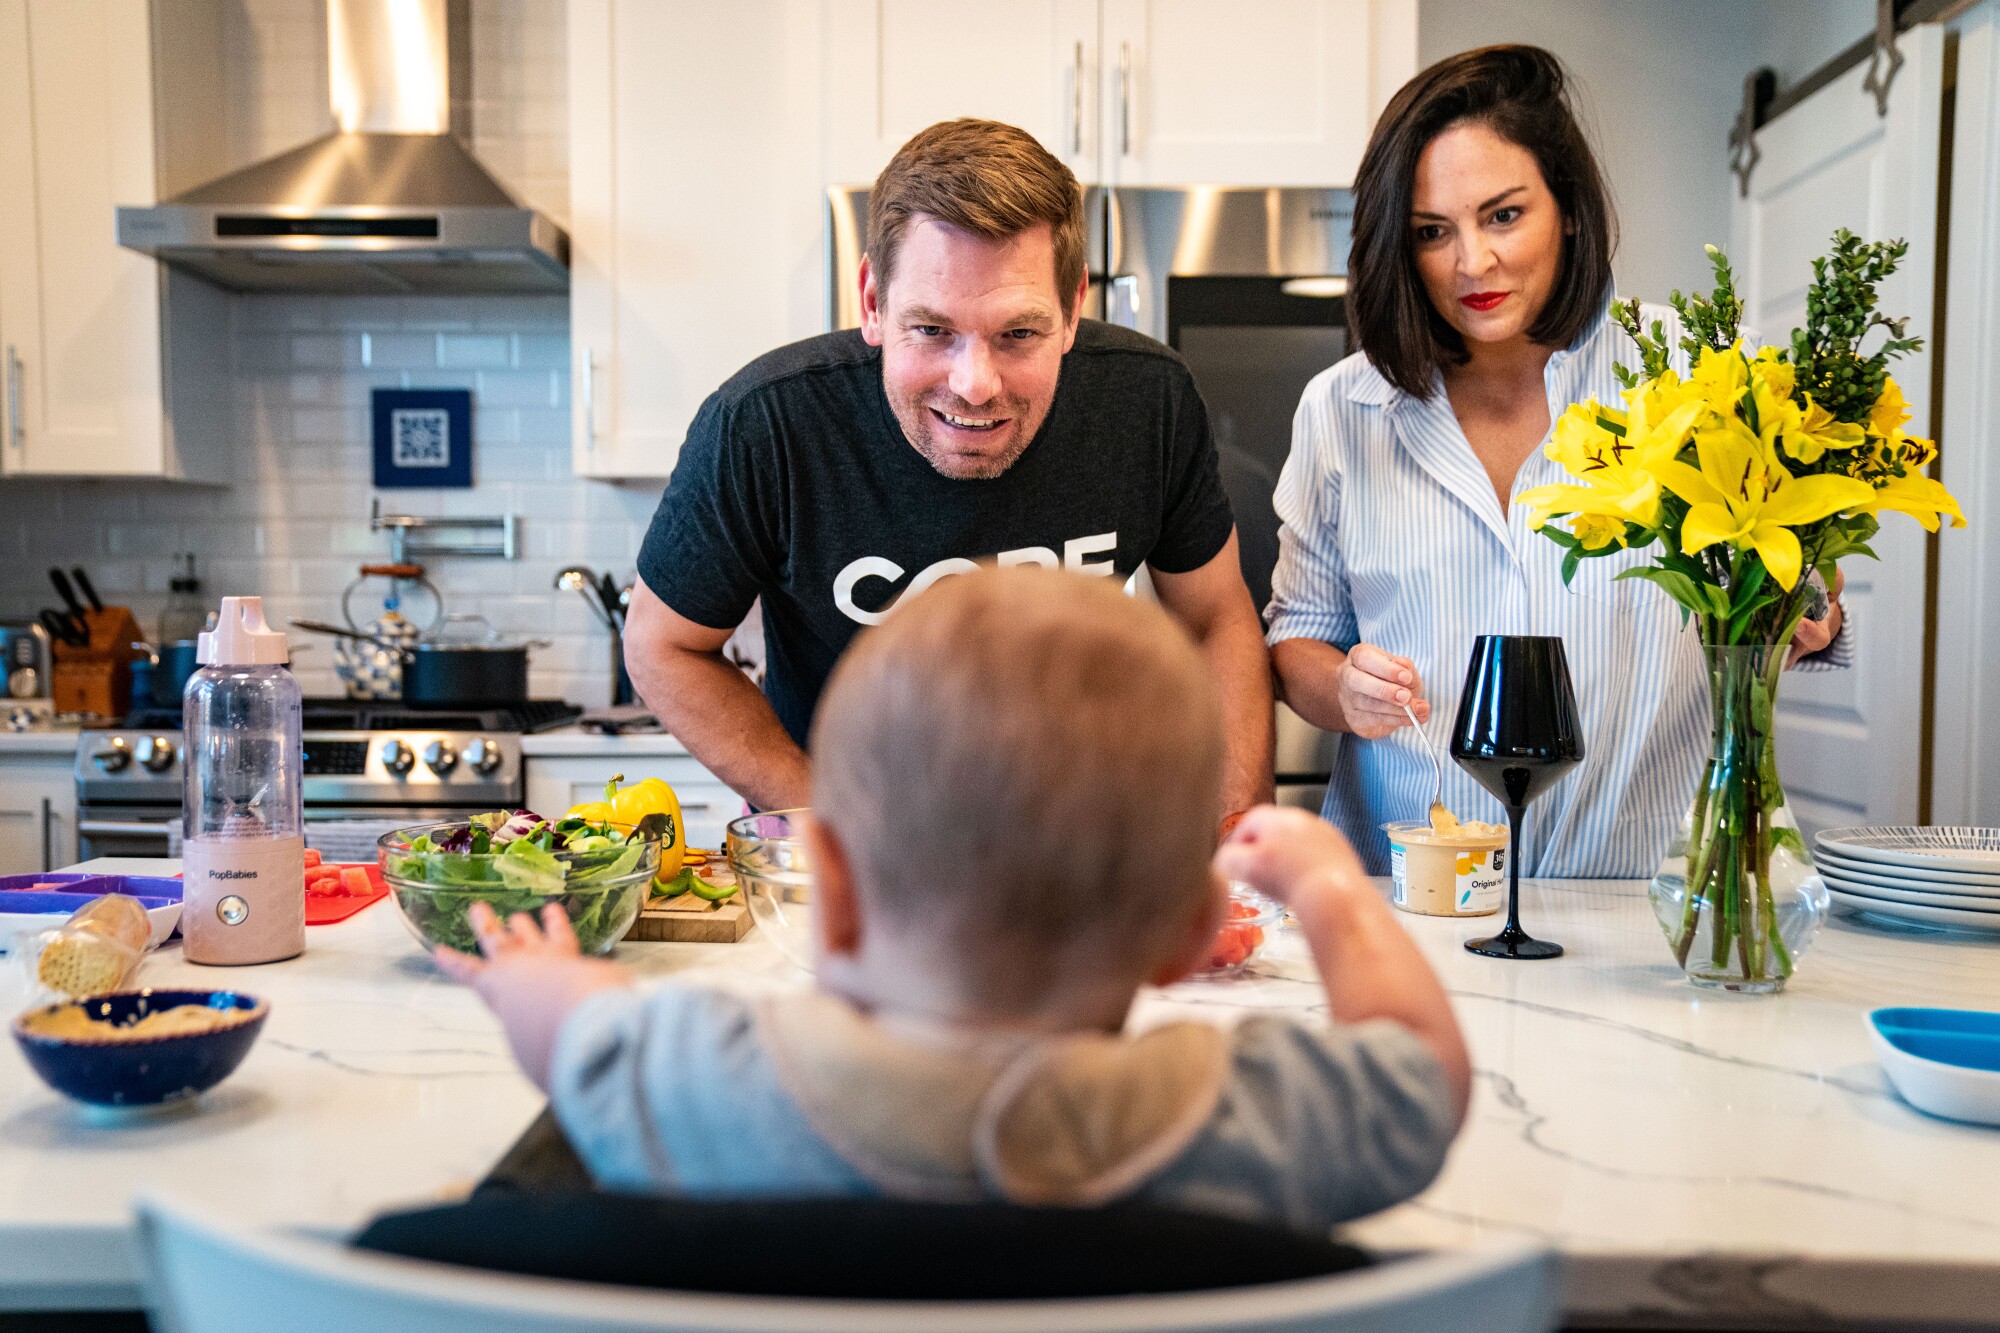 Eric Swalwell and his wife smile at their baby in his high chair.